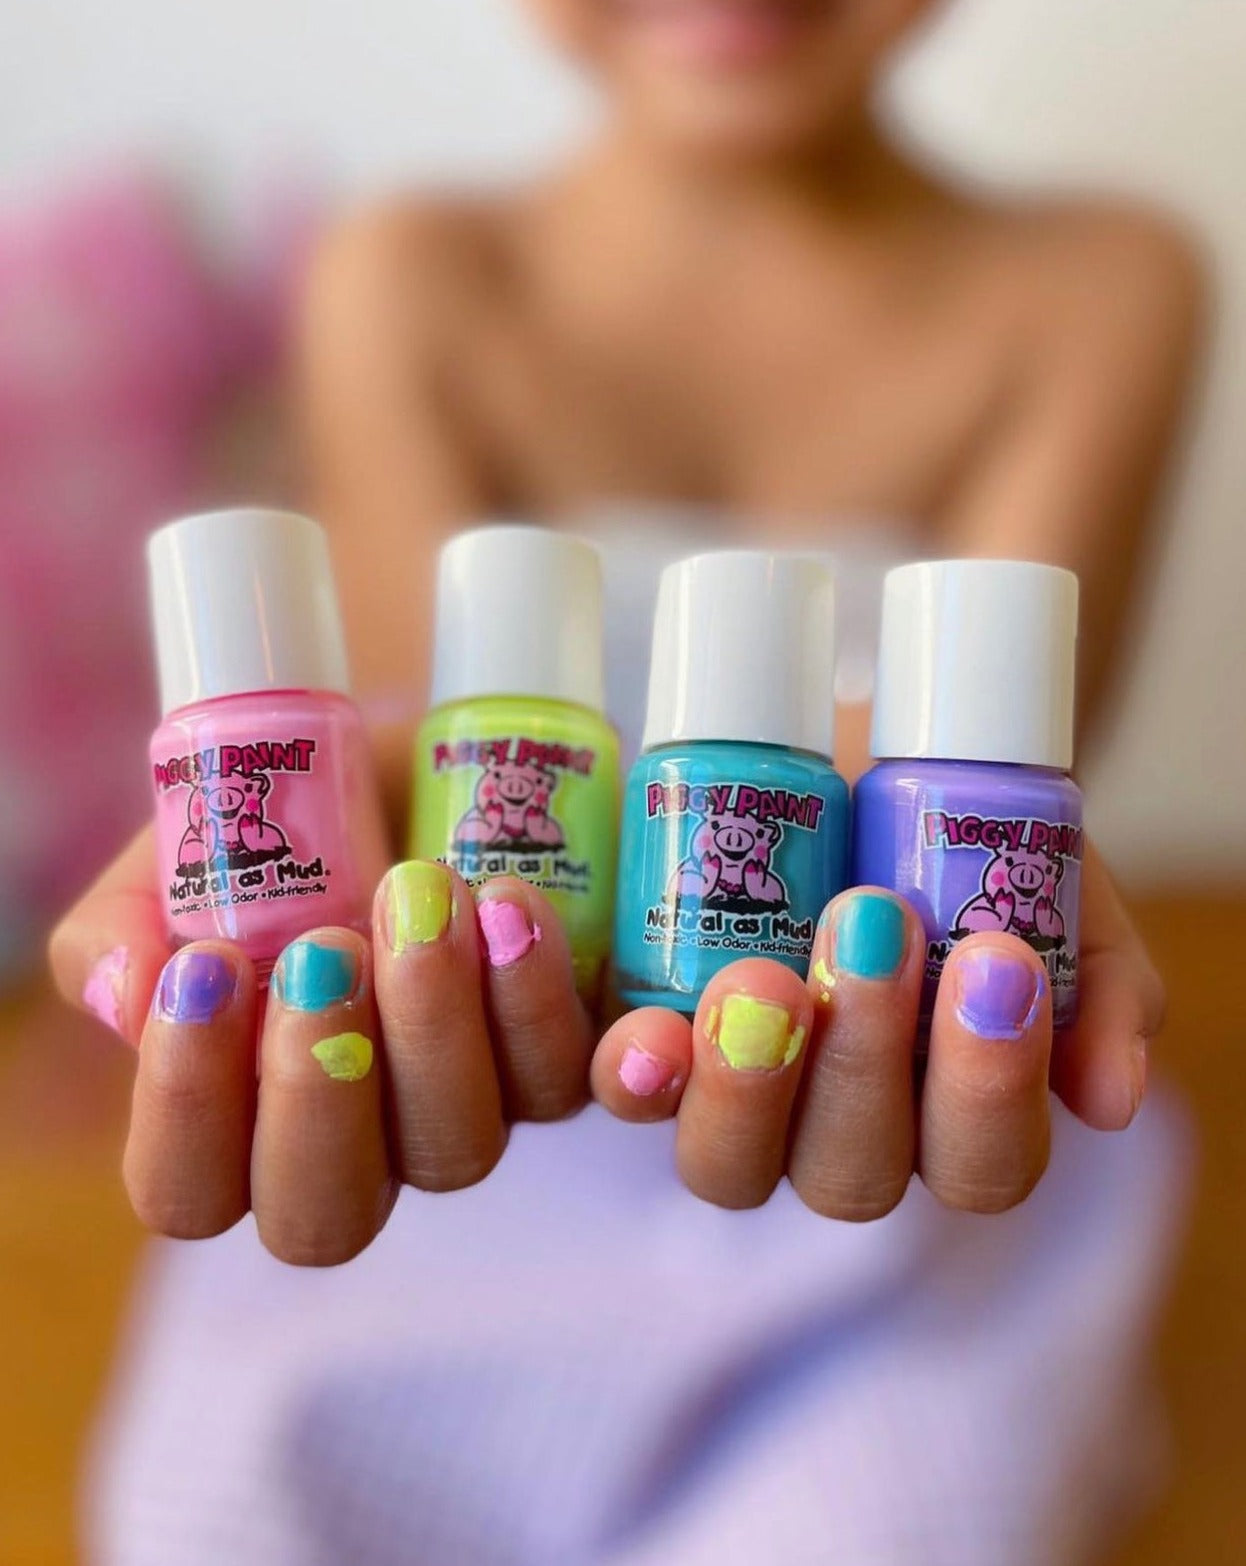 GetUSCart- Piggy Paint 100% Non-toxic Girls Nail Polish - Safe, Chemical  Free Low Odor for Kids, Ice Cream Dream